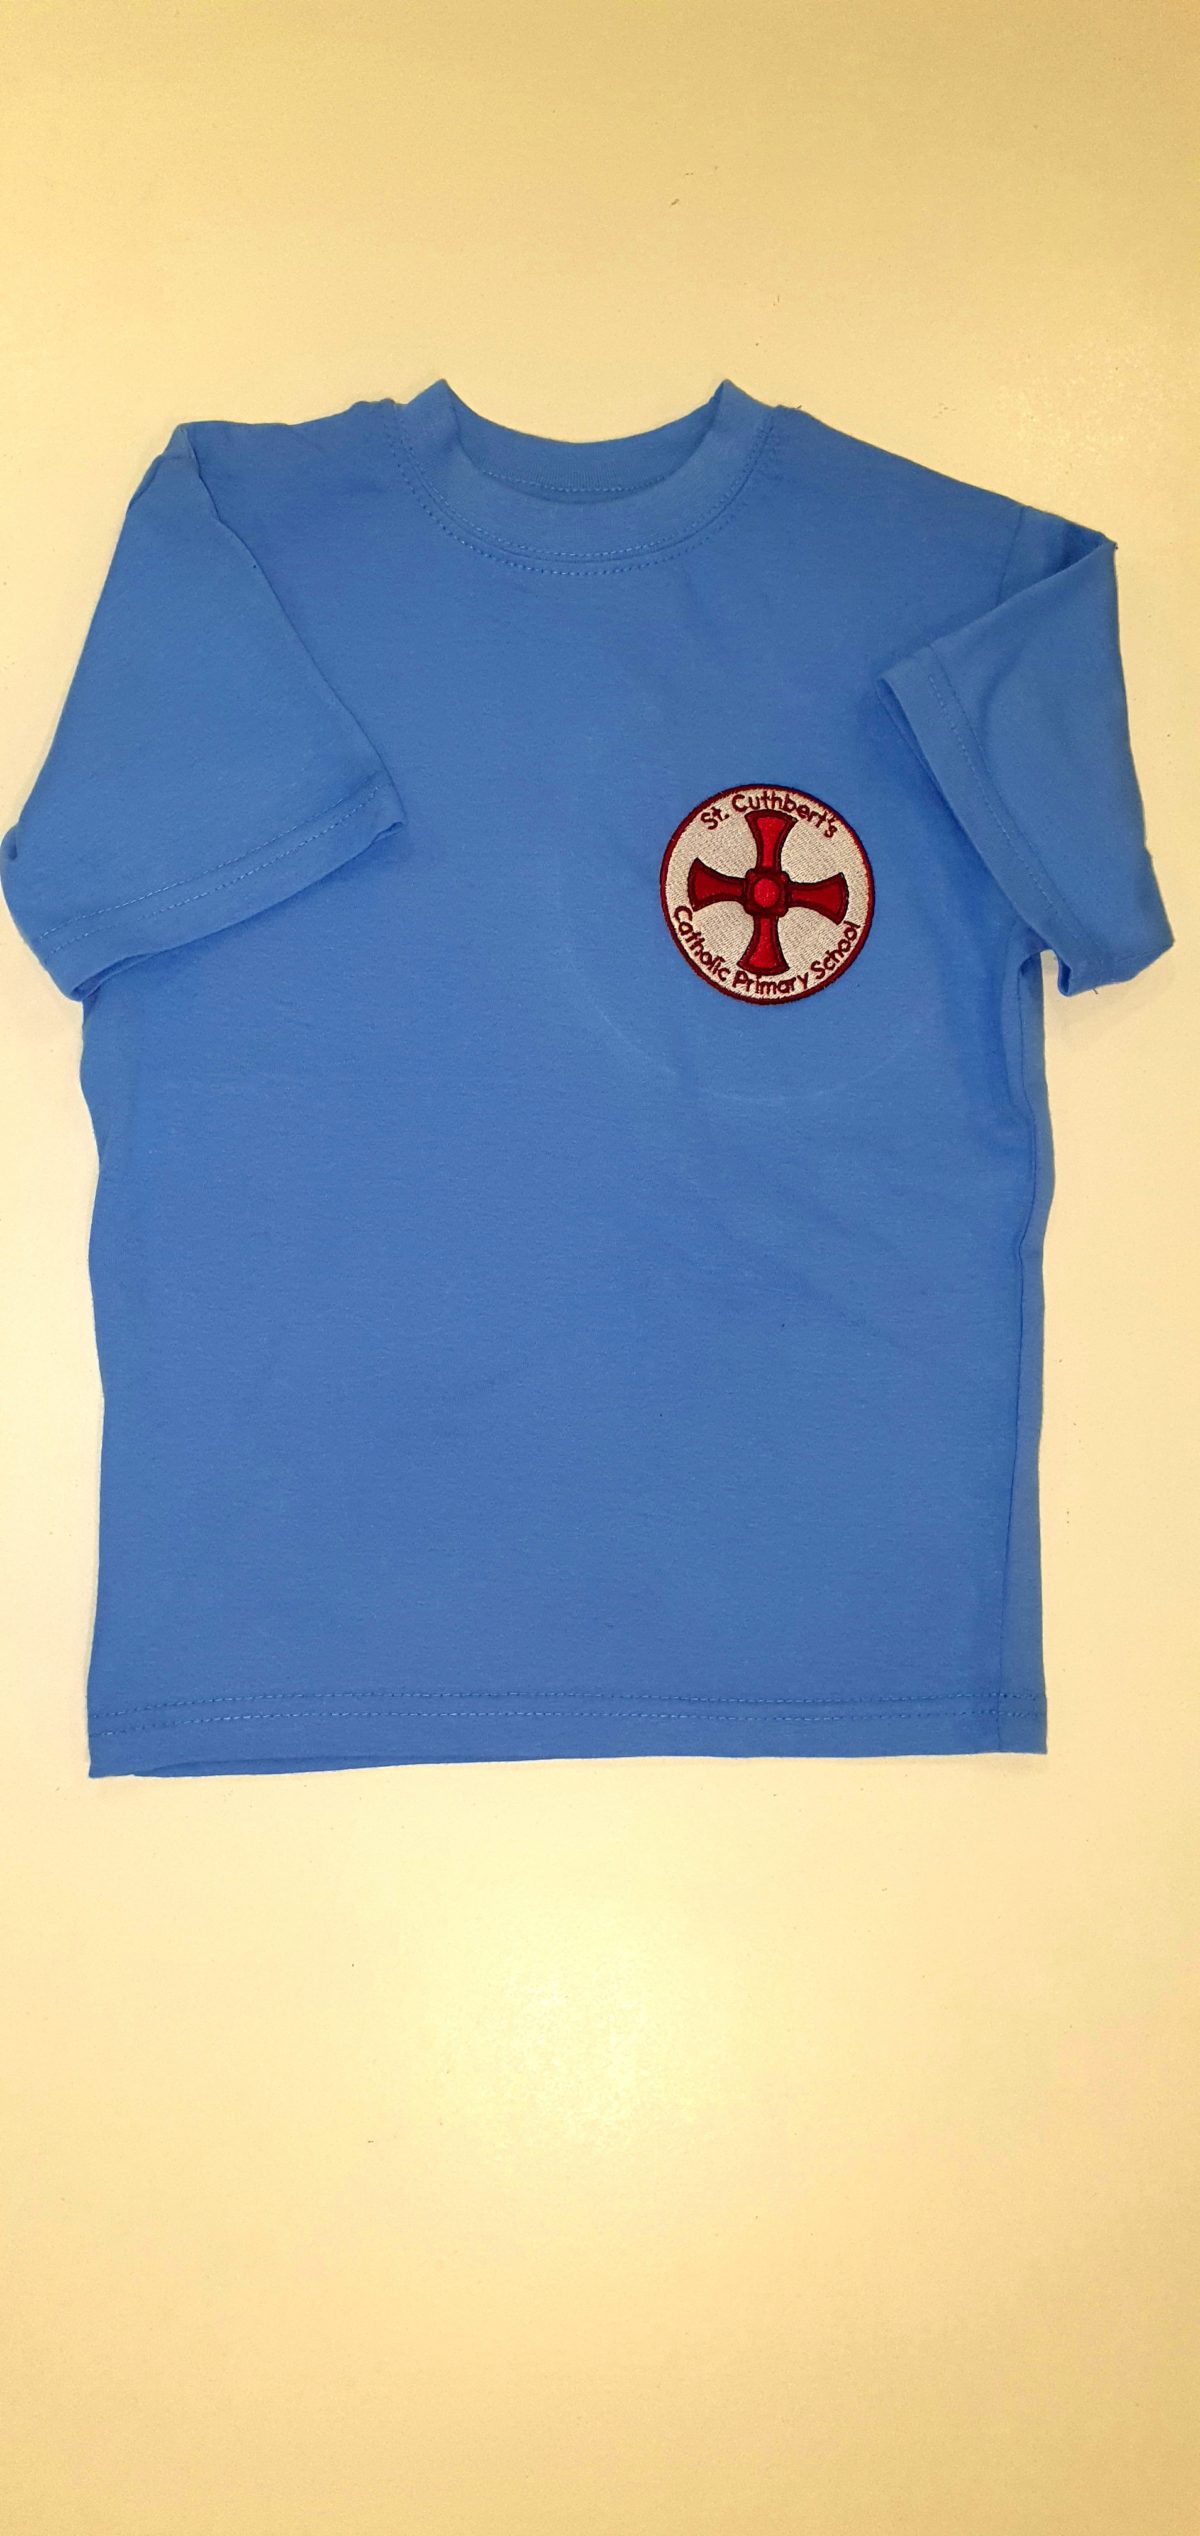 SKY BLUE P.E. T-SHIRT with embroidered school logo